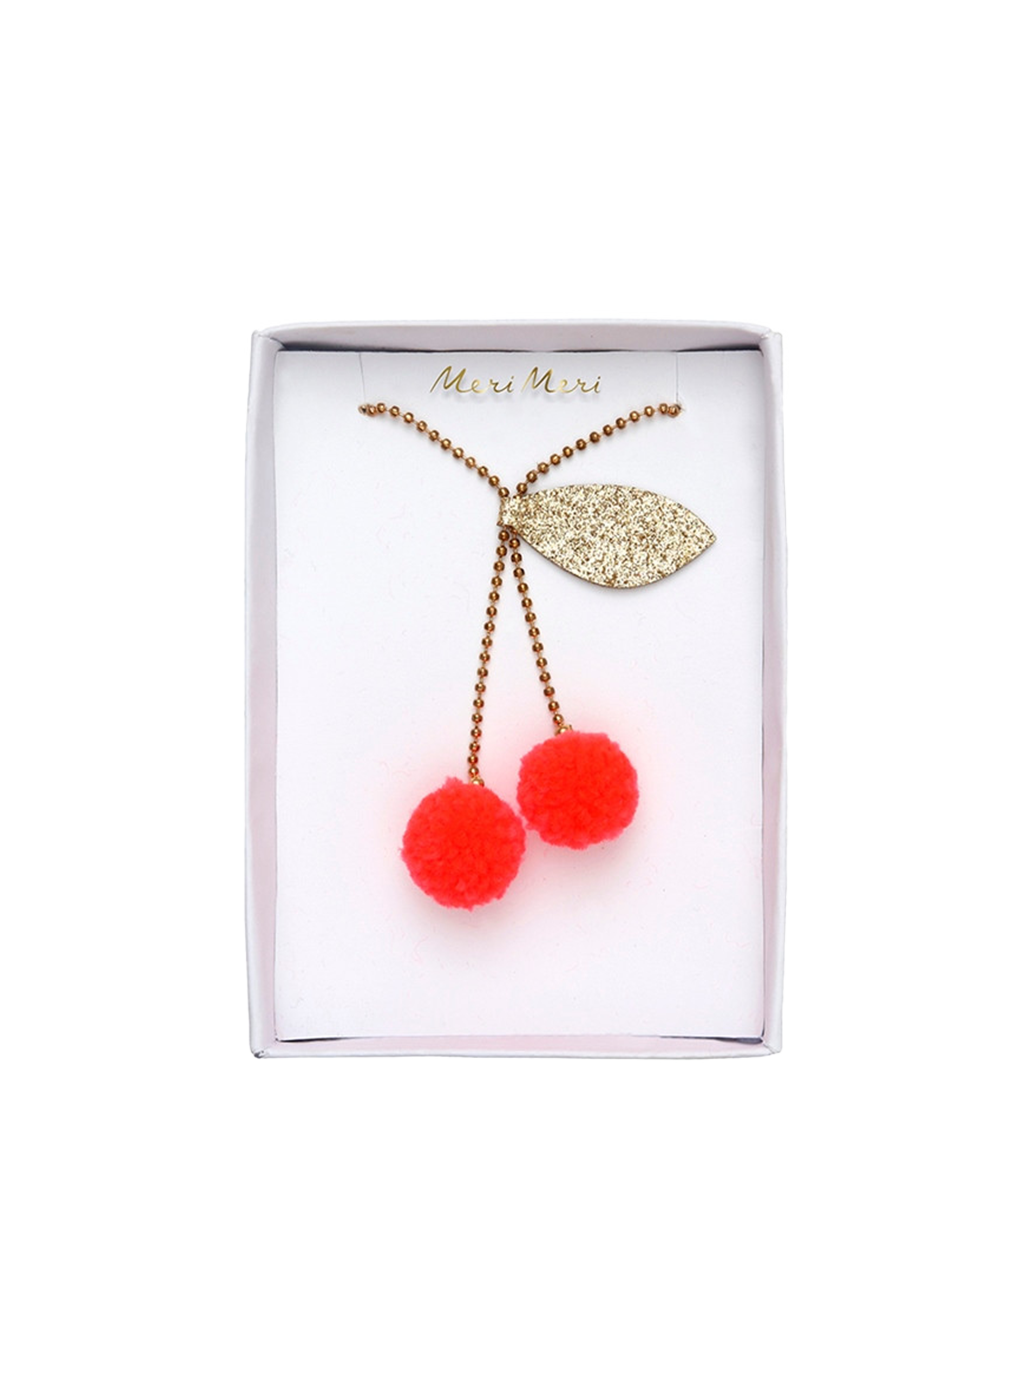 Necklace with cherries made of pompoms